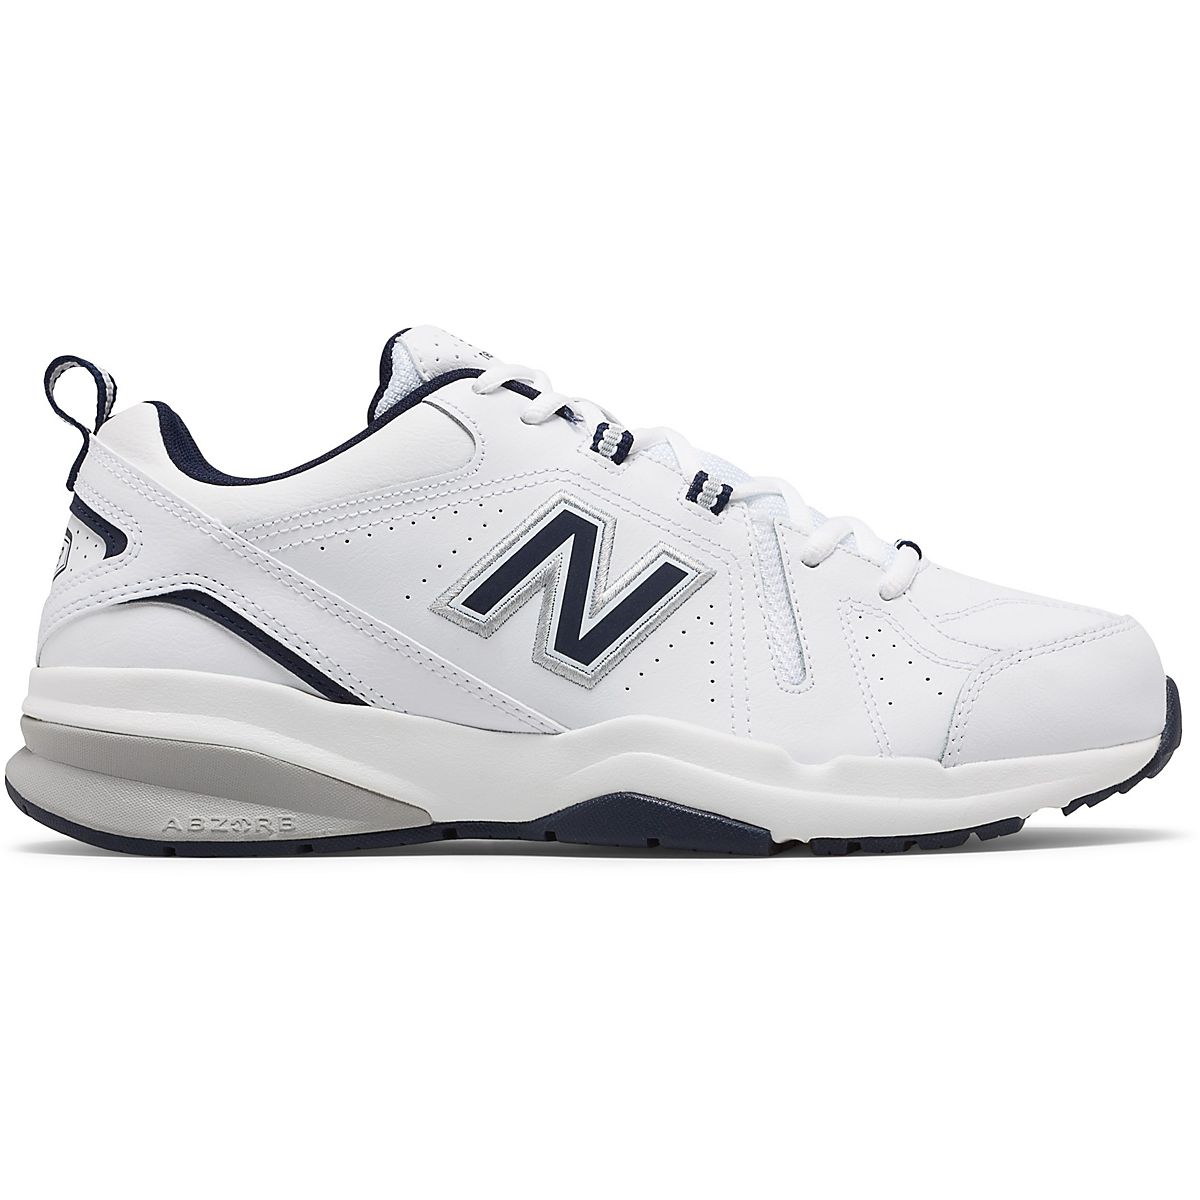 New Balance Men's 608 Training Shoes | Free Shipping at Academy